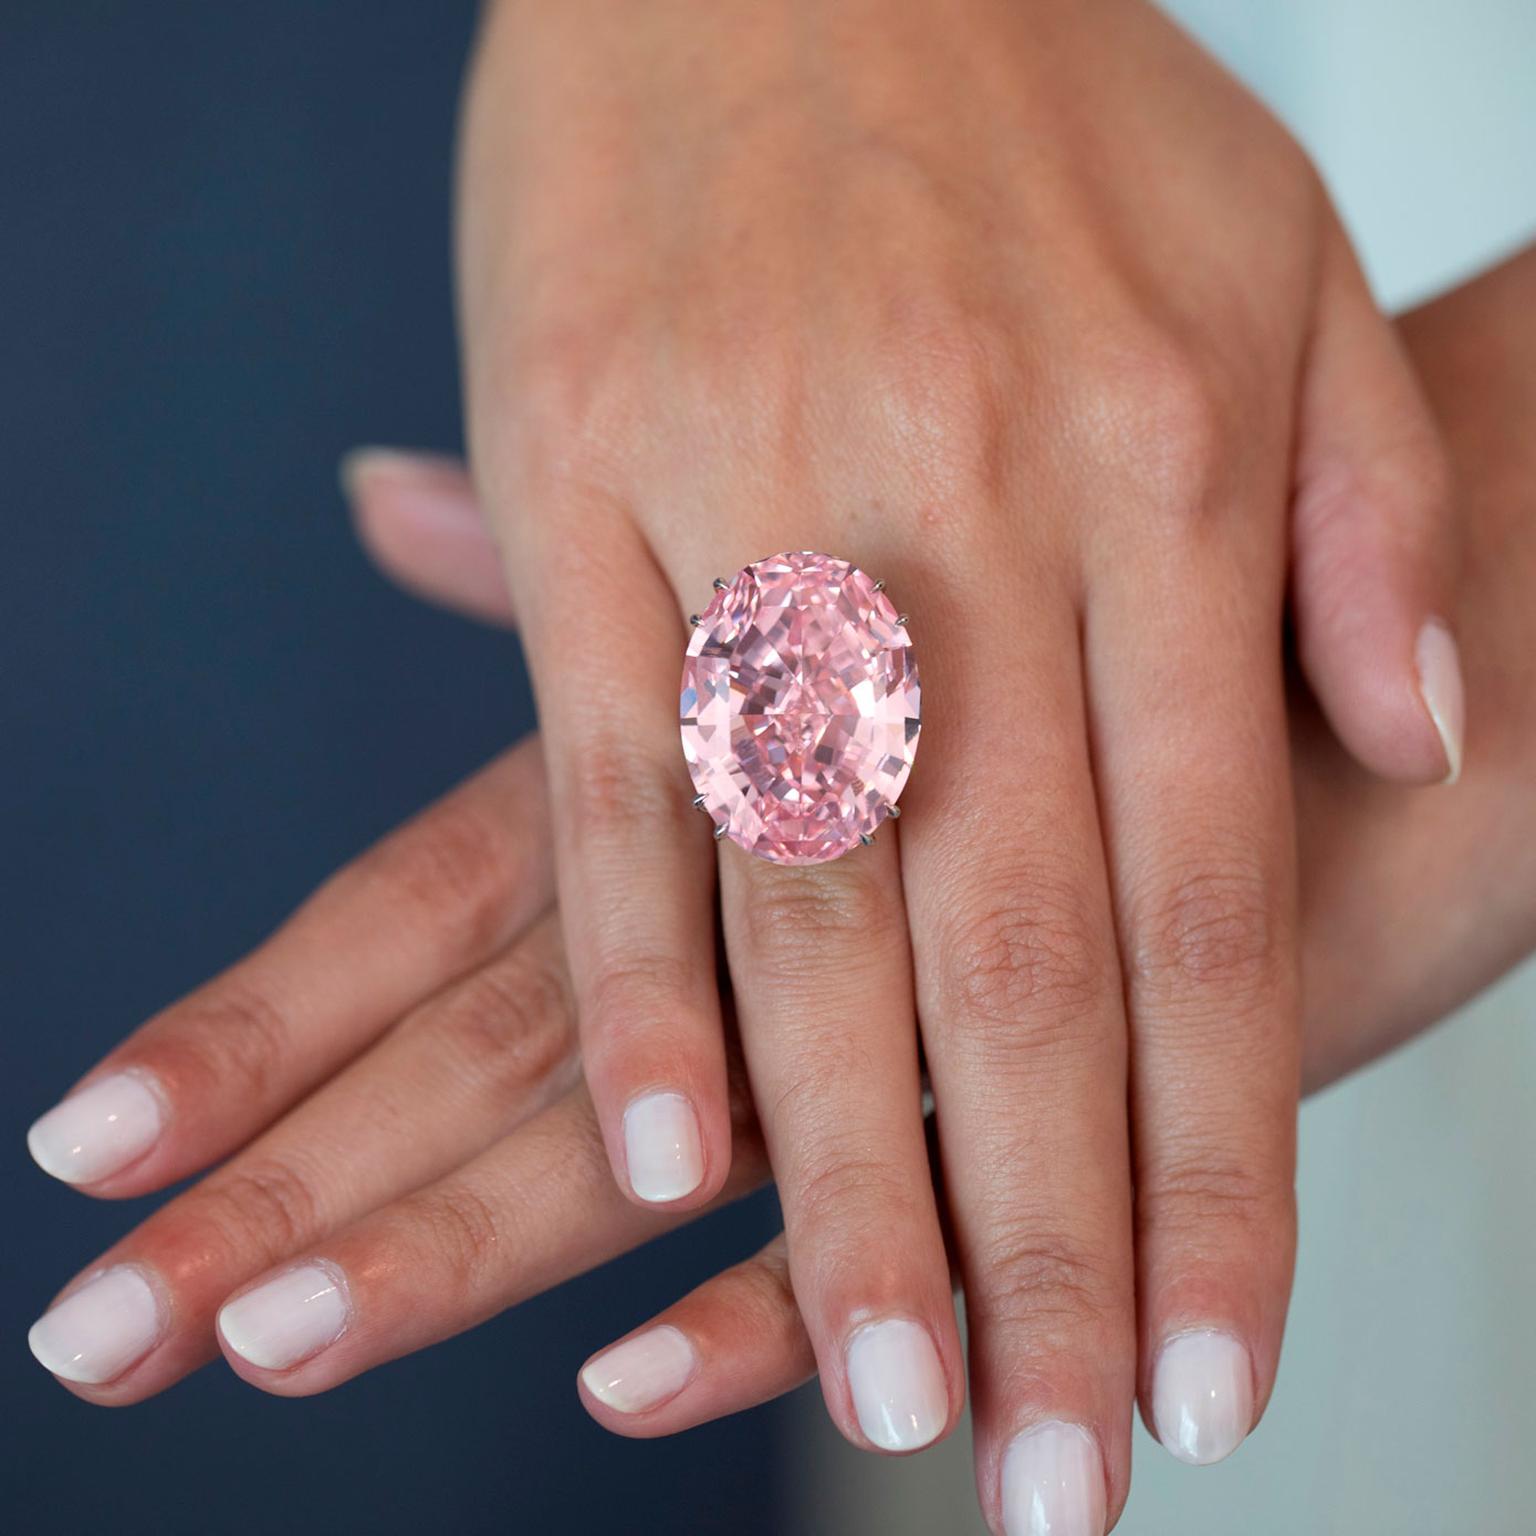 The 59.60-carat Pink Star diamond is the world's most expensive gemstone sold for $71.2 m